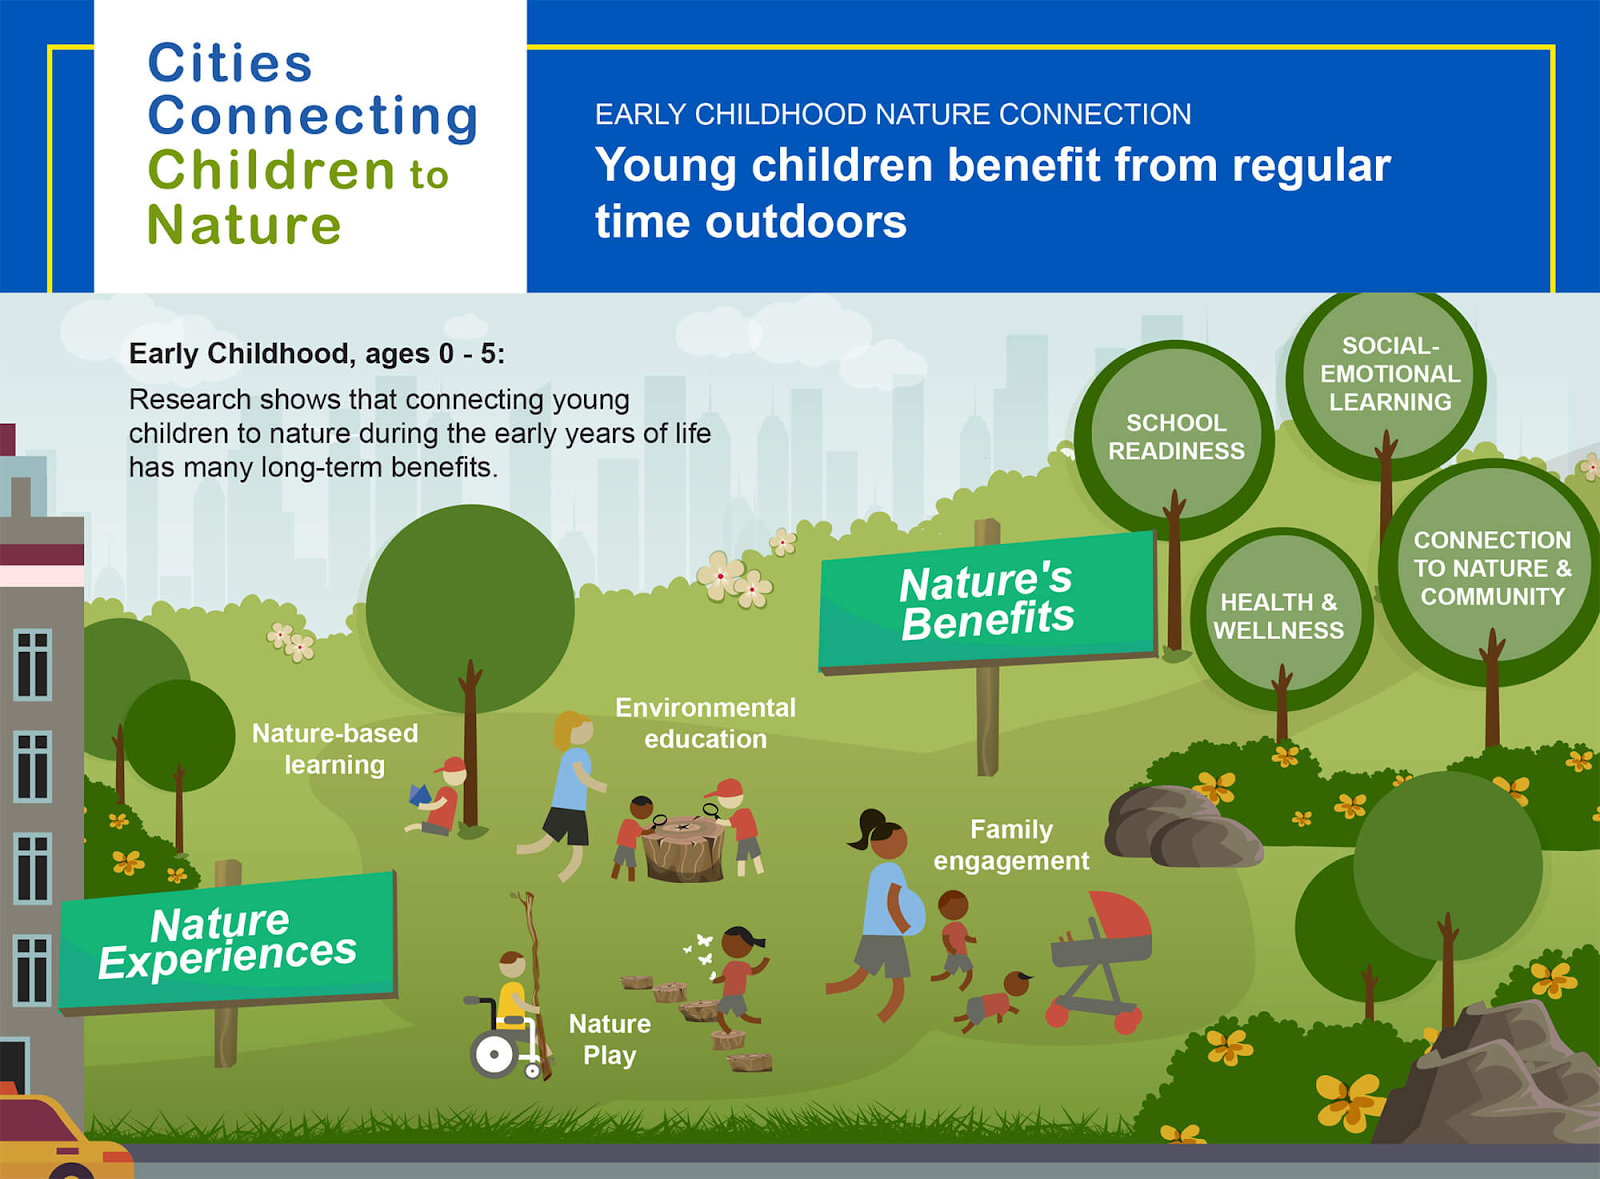 young children benefit from regular time outdoors